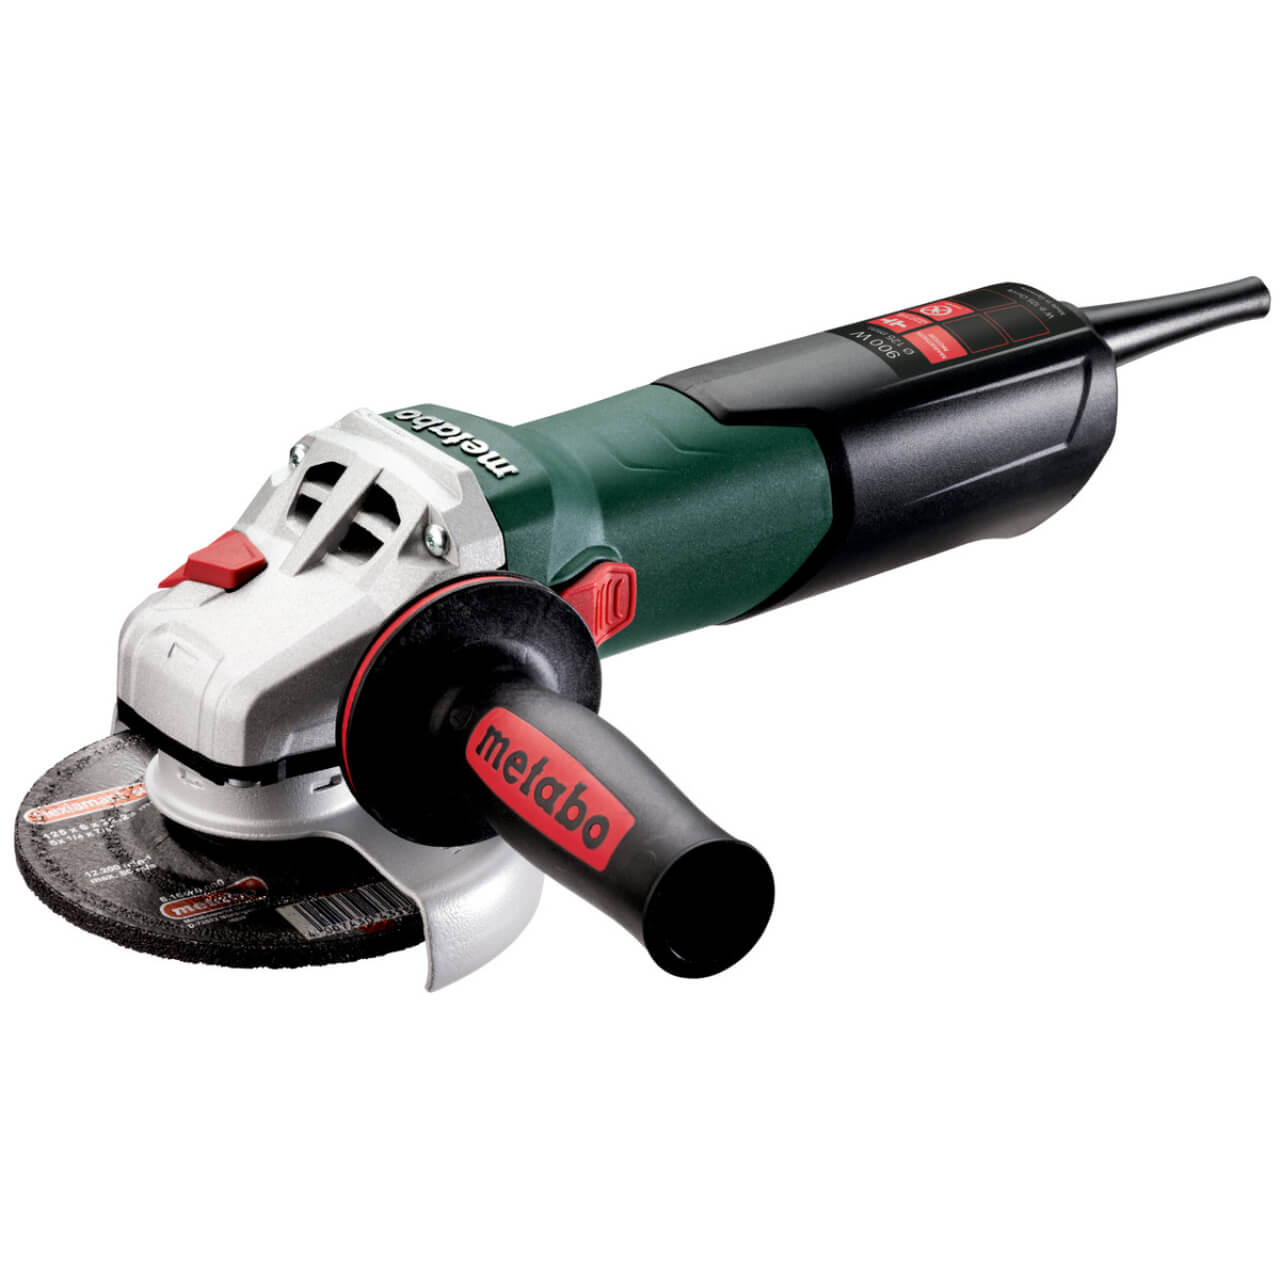 Metabo W 9-125 QUICK Angle Grinder 125mm 900W Safety Clutch Quick Locking Nut